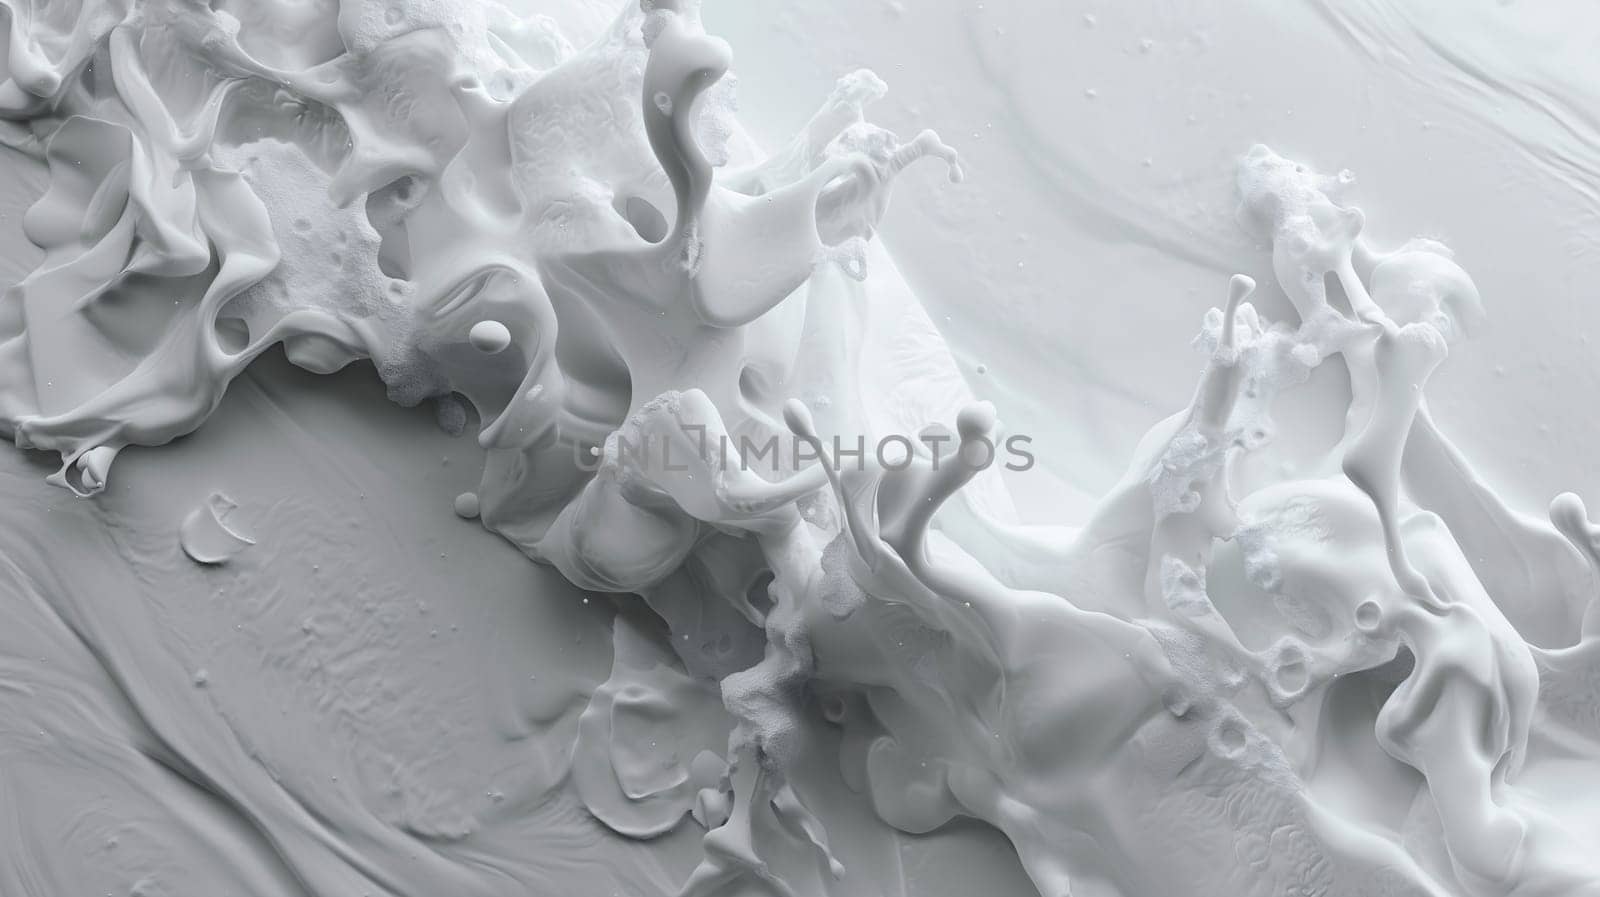 Close-Up View of White Paint Splashes and Swirls Capturing Dynamic Movement by chrisroll